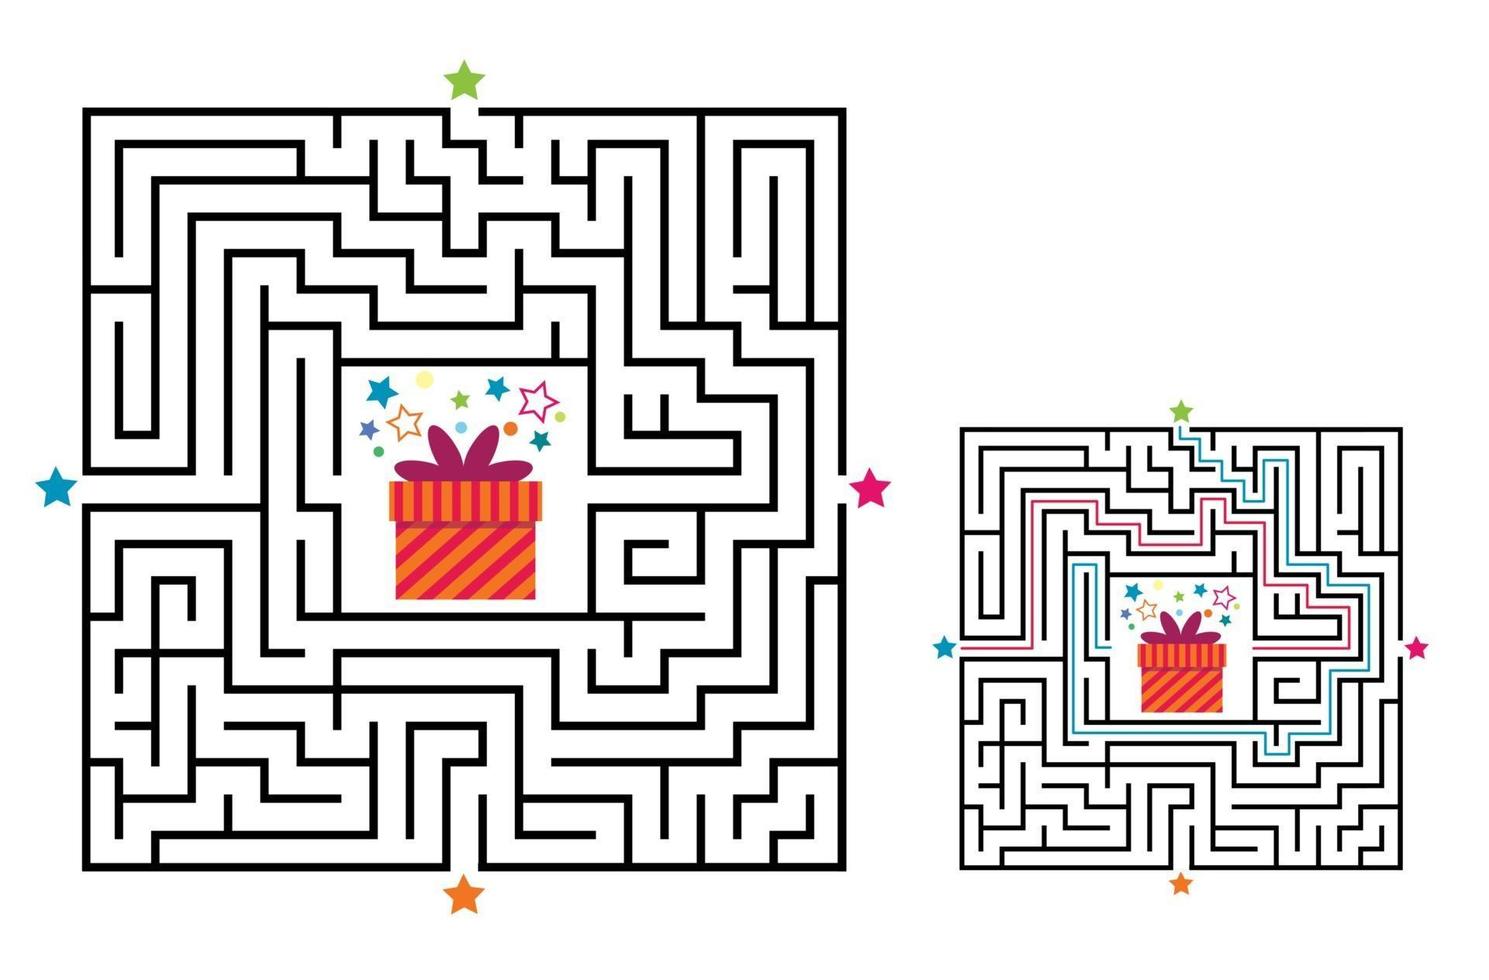 Square maze labyrinth game for kids. Labyrinth logic conundrum. vector